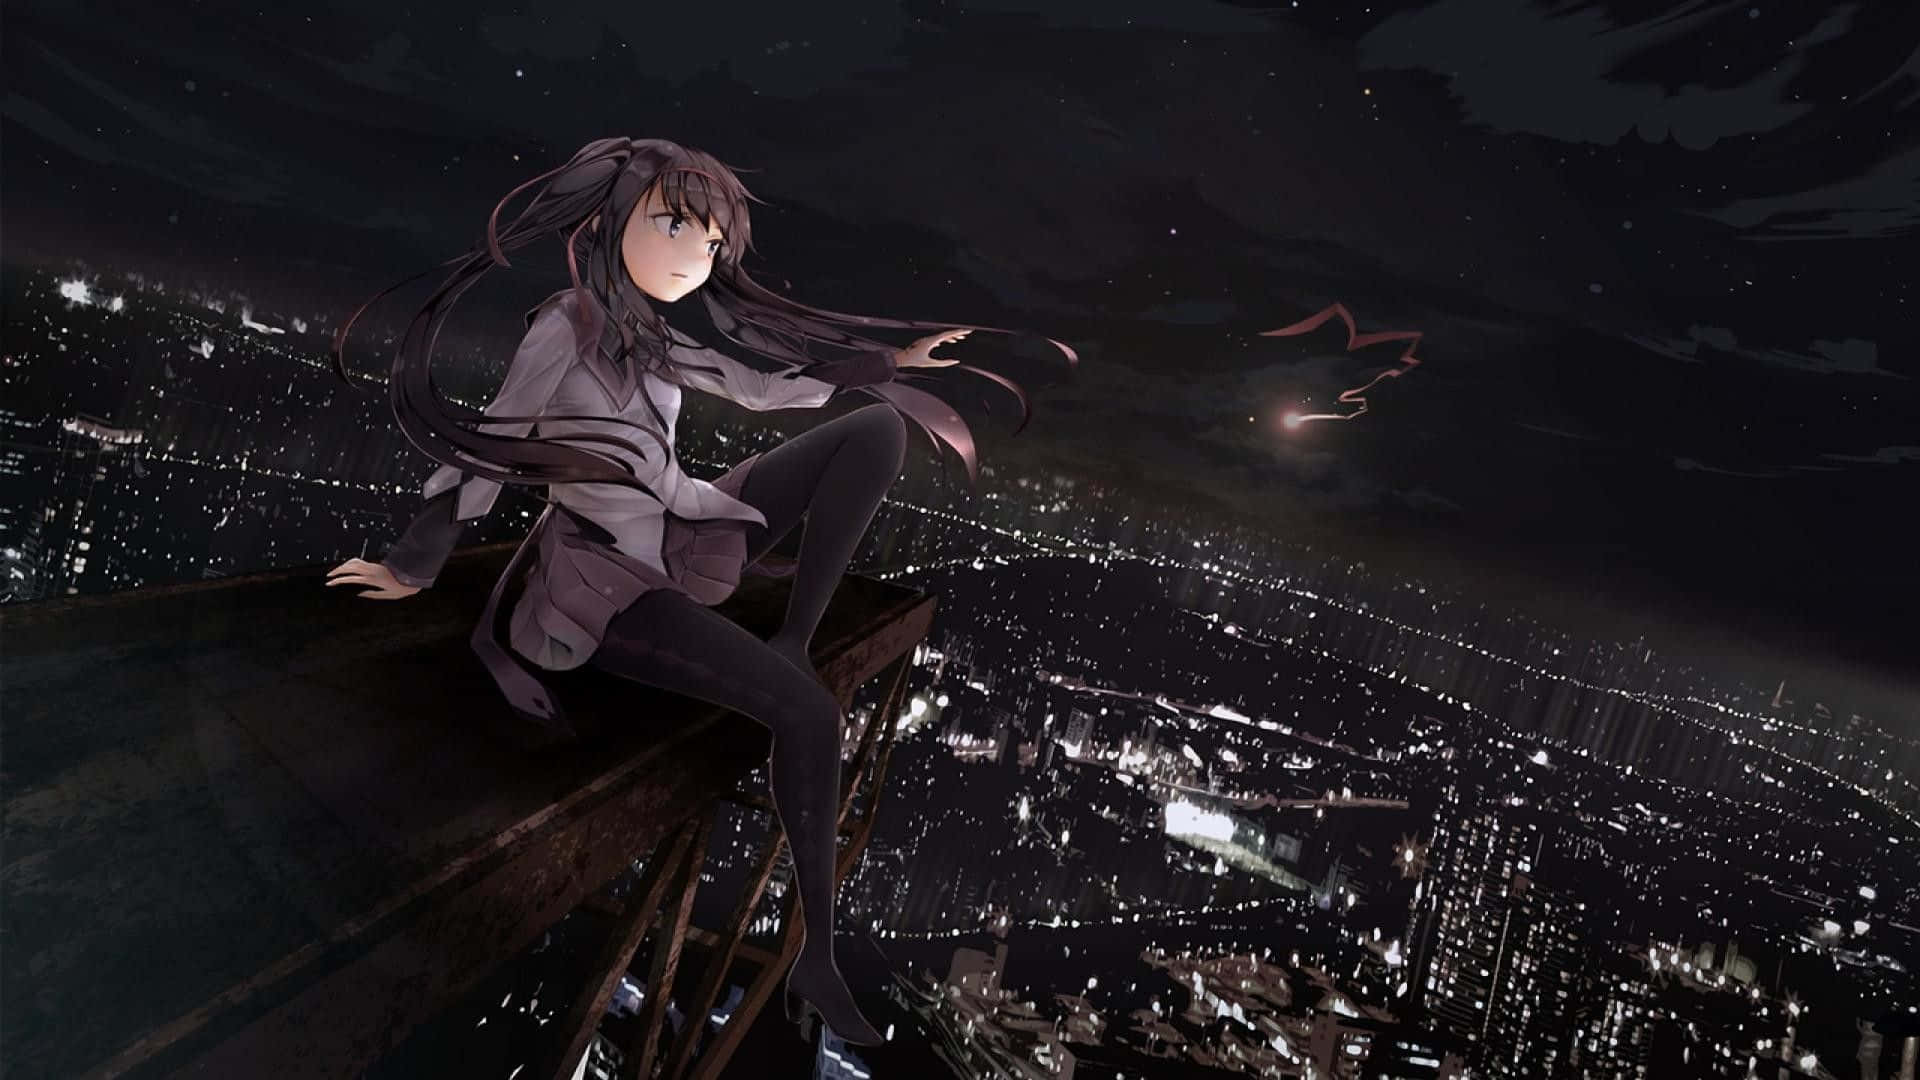 A Girl Sitting On A Ledge At Night Wallpaper